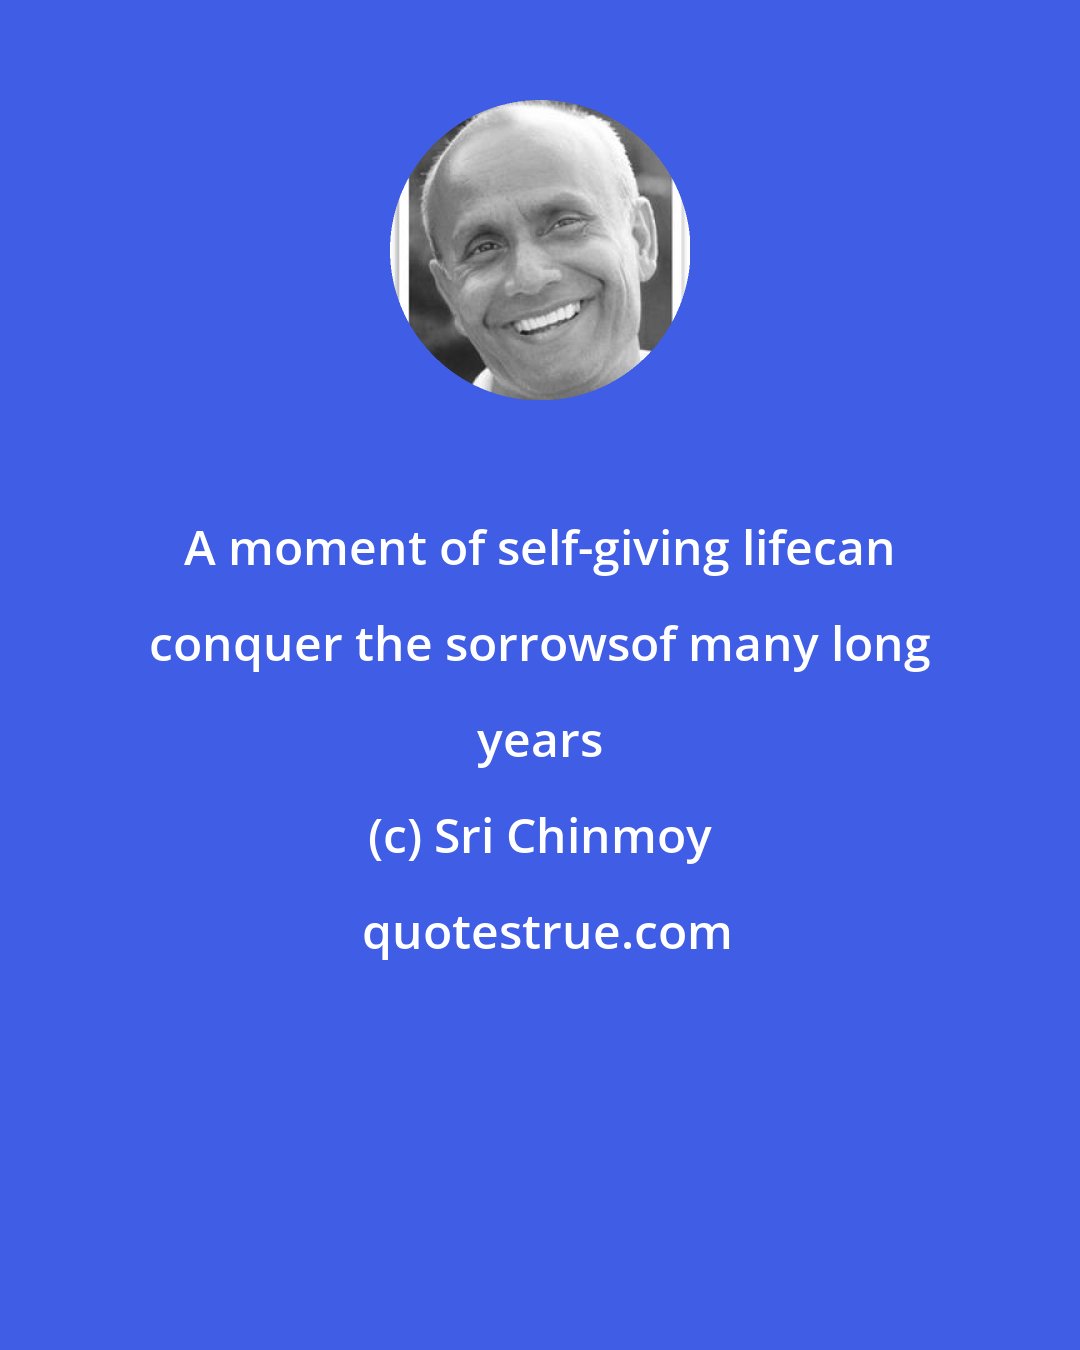 Sri Chinmoy: A moment of self-giving lifecan conquer the sorrowsof many long years